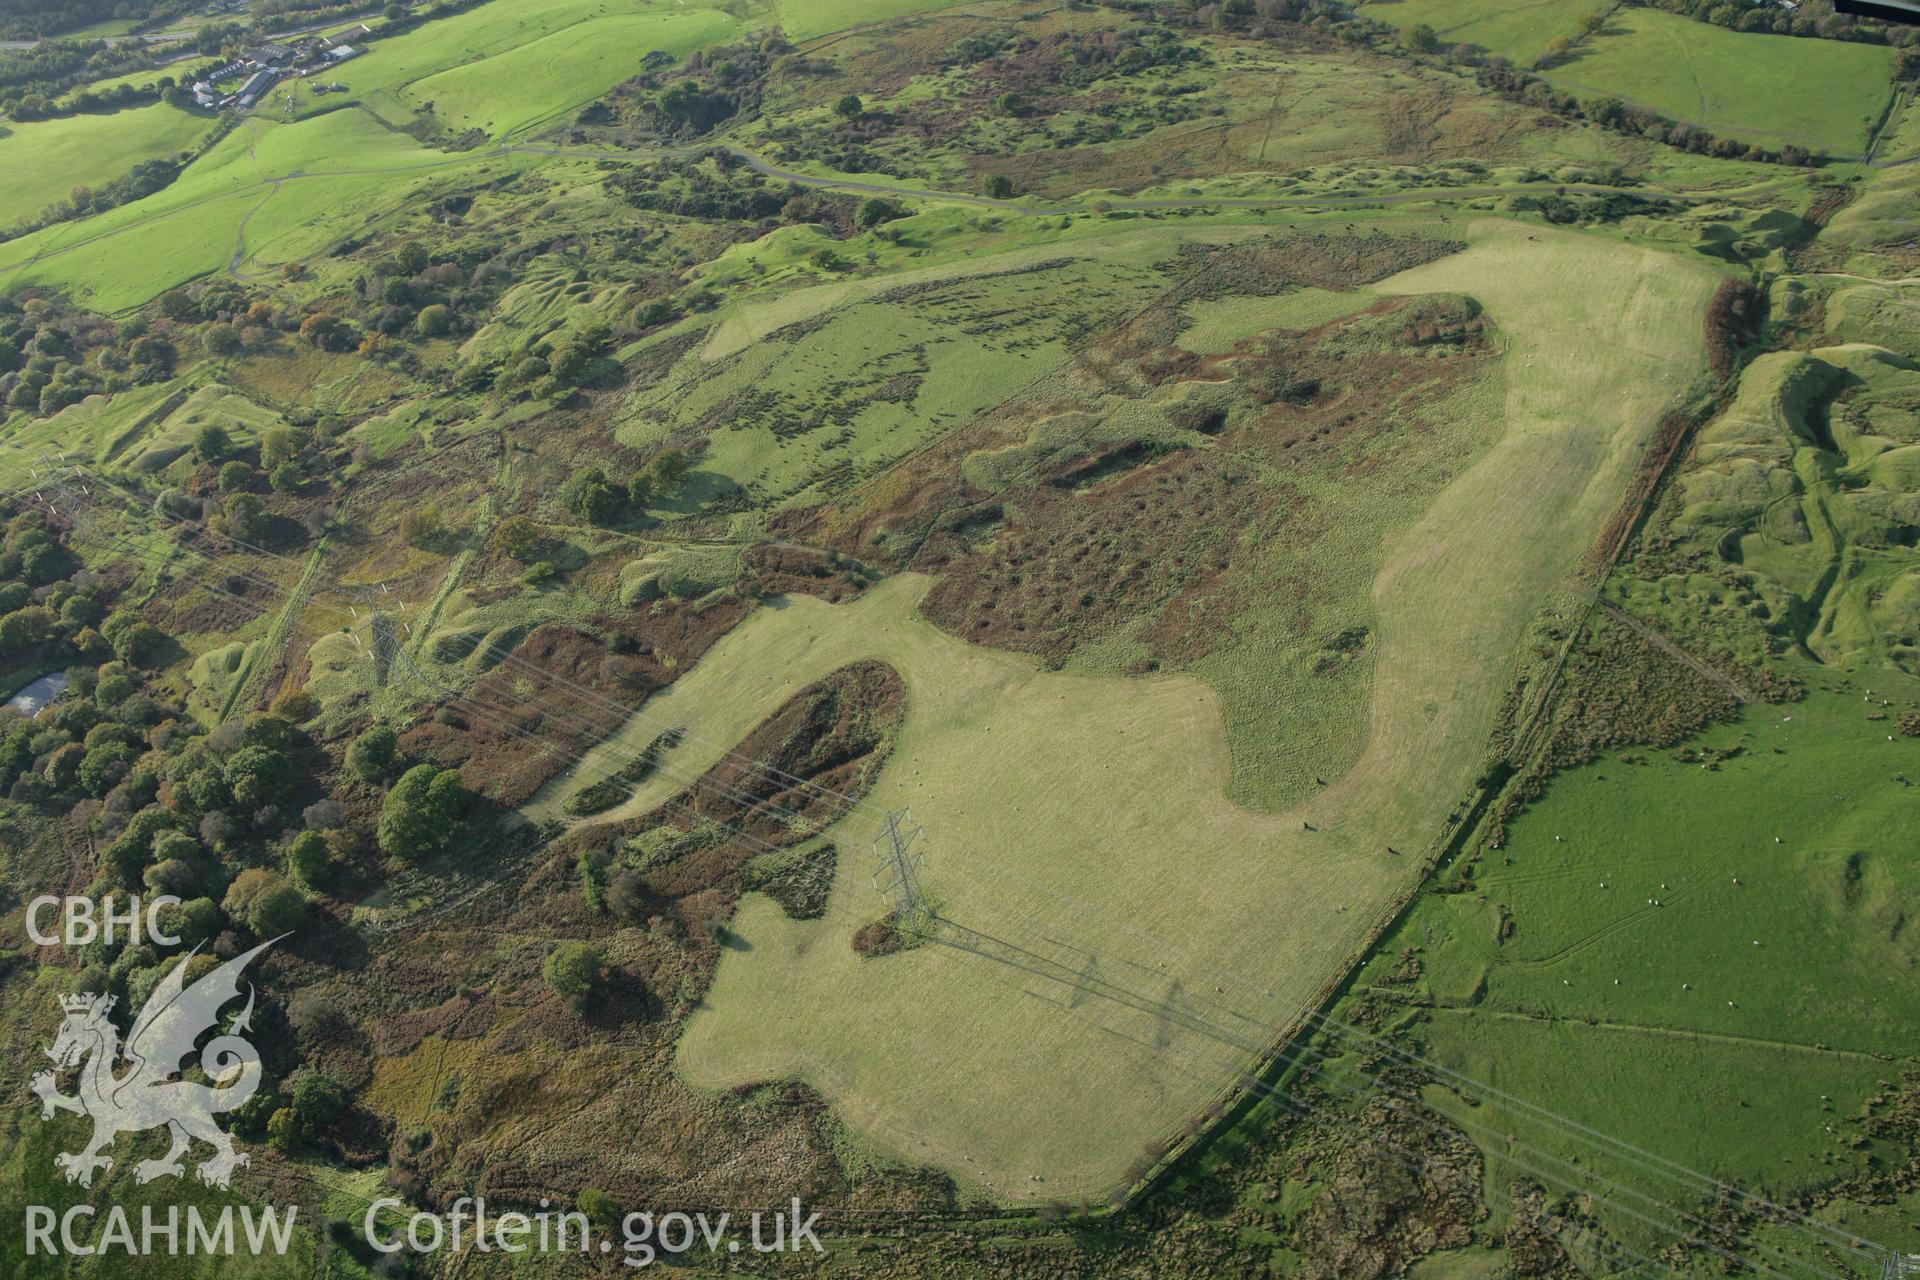 RCAHMW colour oblique photograph of Deserted Mining Village, Ffos-y-fran. Taken by Toby Driver on 16/10/2008.